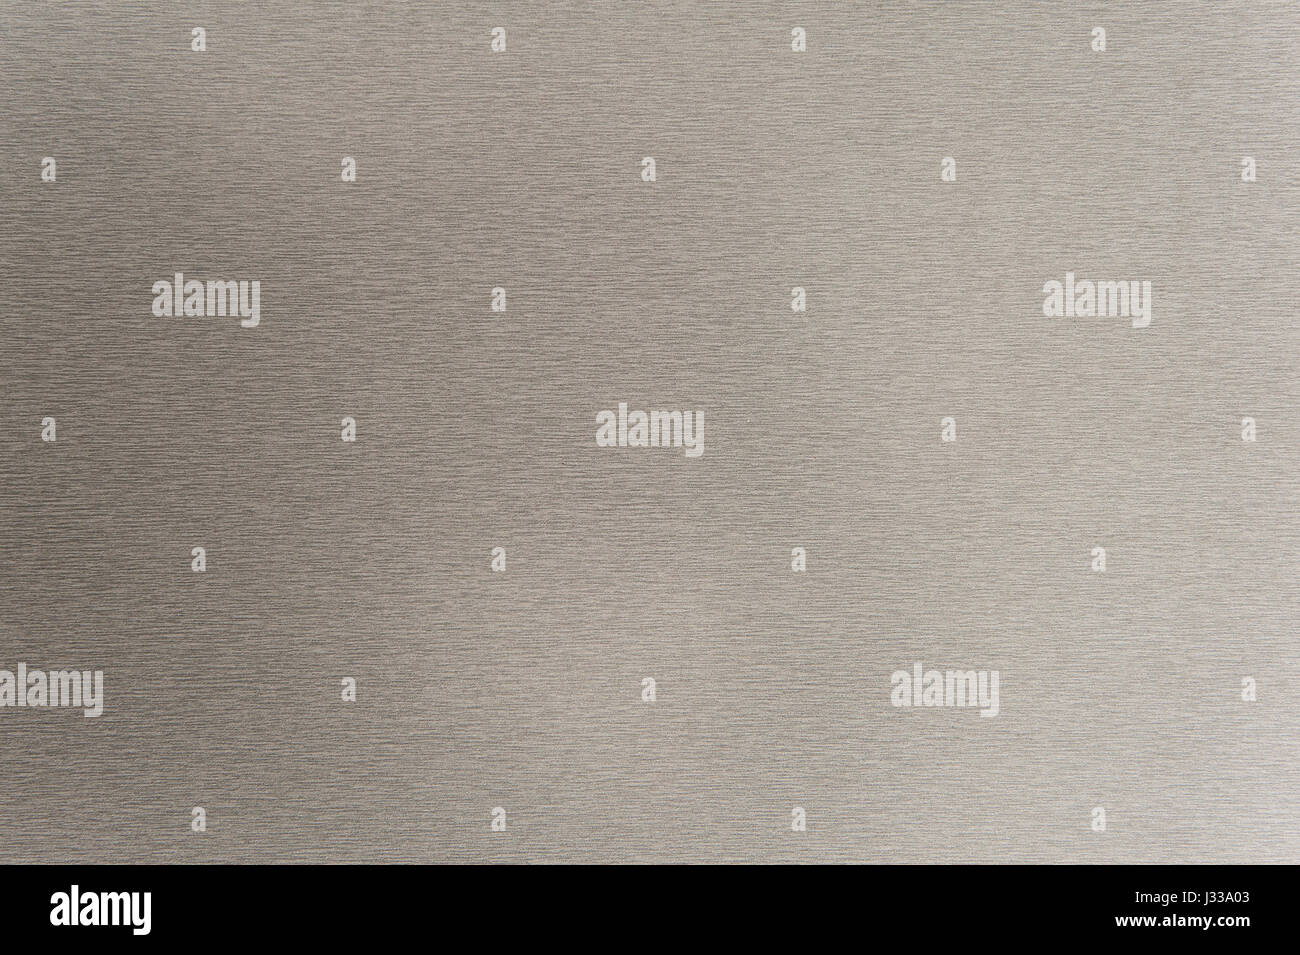 A brushed metal texture for your backgrounds Stock Photo